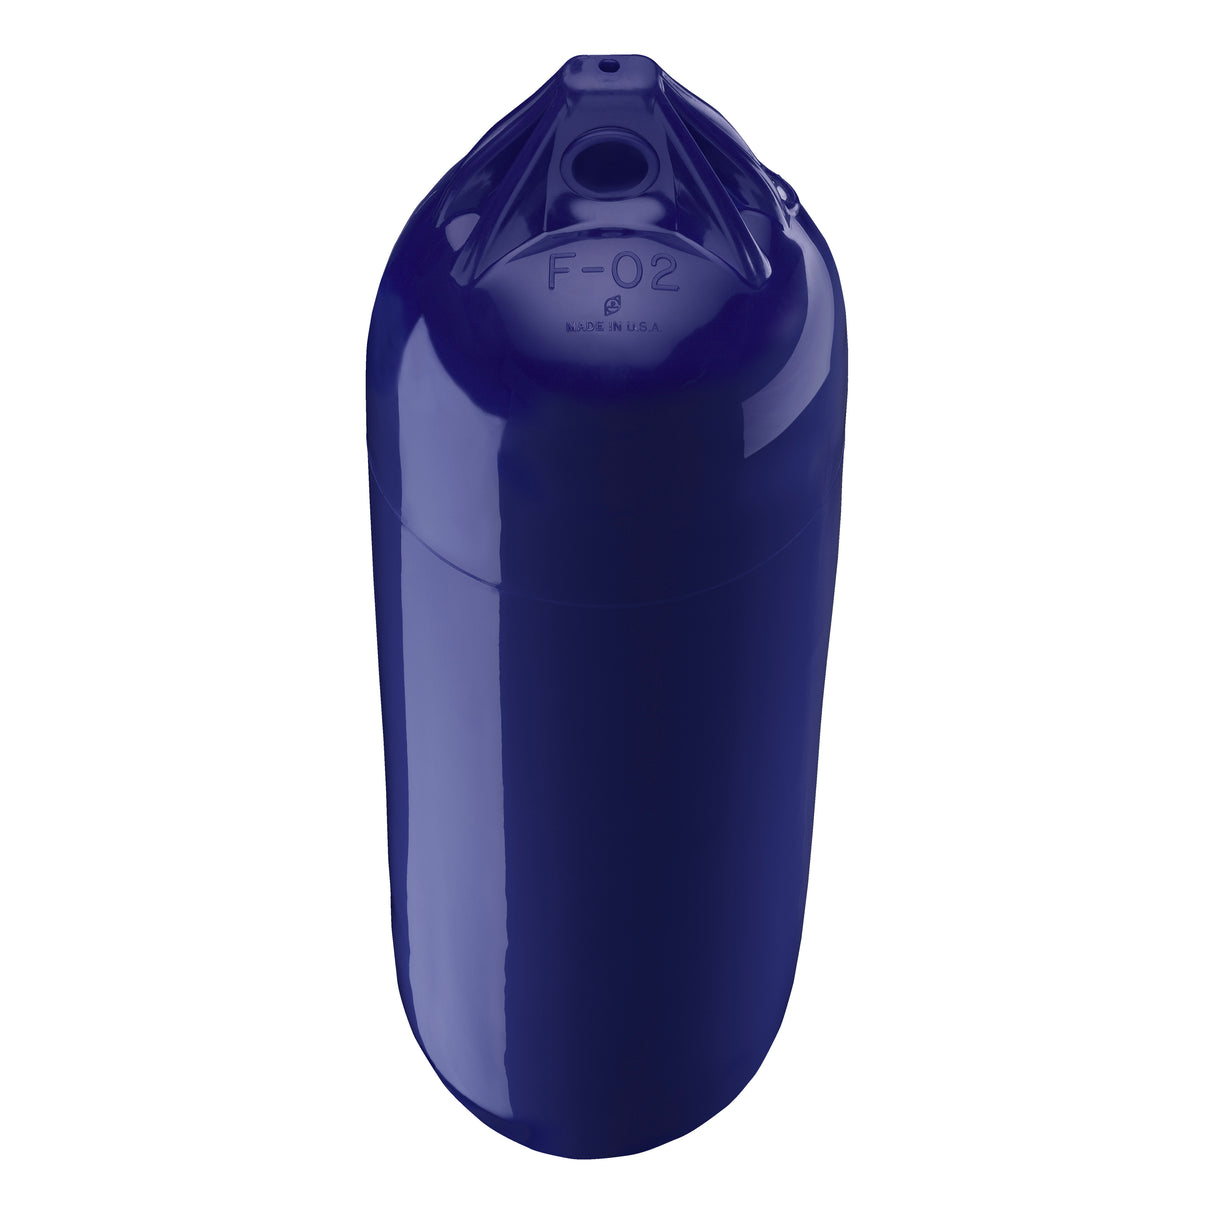 Navy Blue boat fender with Navy-Top, Polyform F-02 angled shot